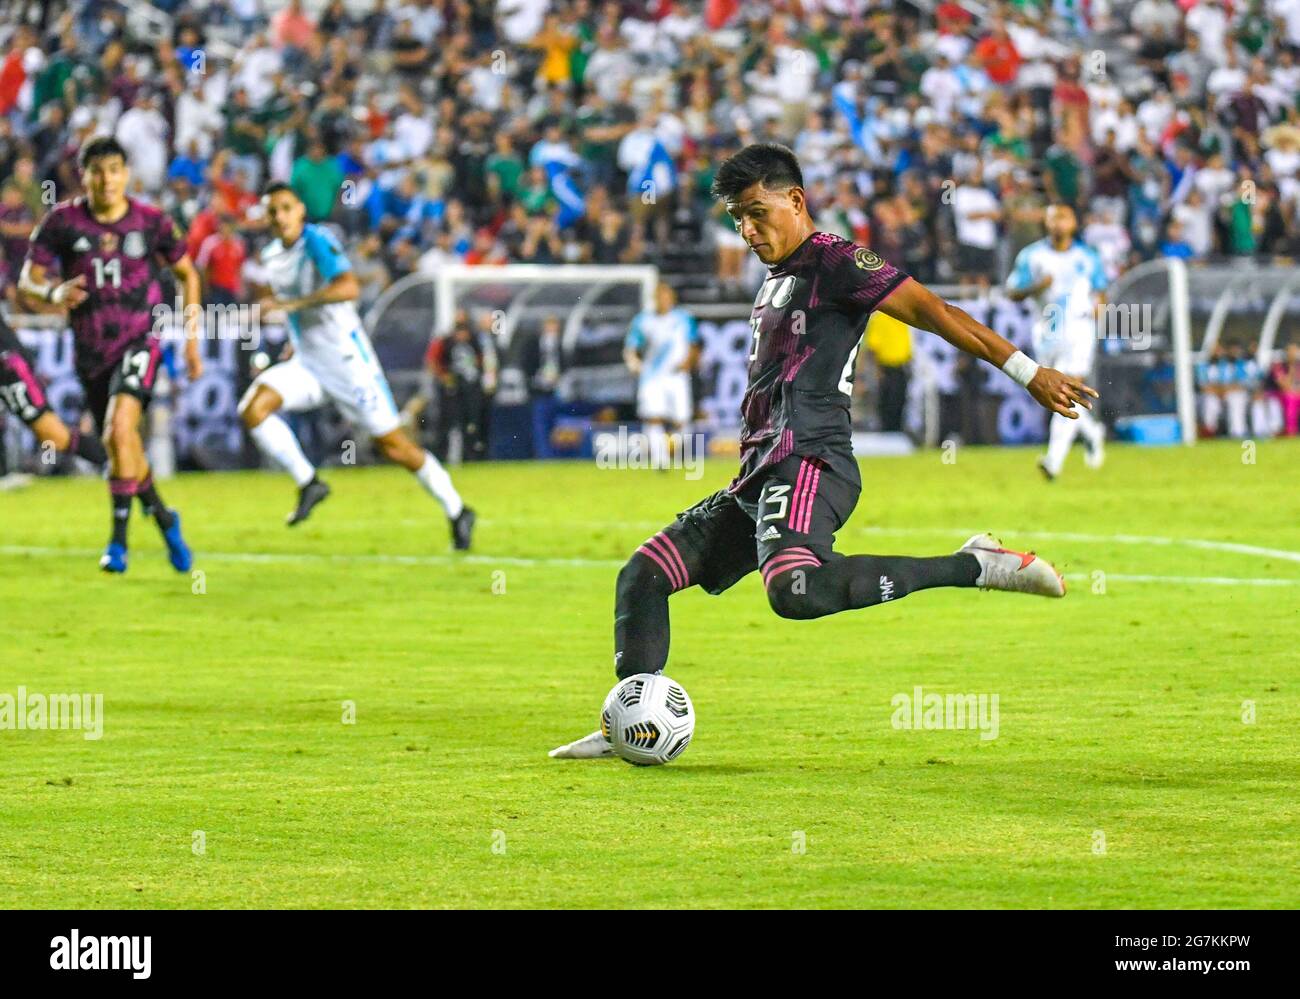 Jul 14, 2021: Mexico midfielder Alan Cervantes (13) takes a shot on the  goal in the second half during a CONCACAF Gold Cup game between Mexico and  Guatemala at the Cotton Bowl